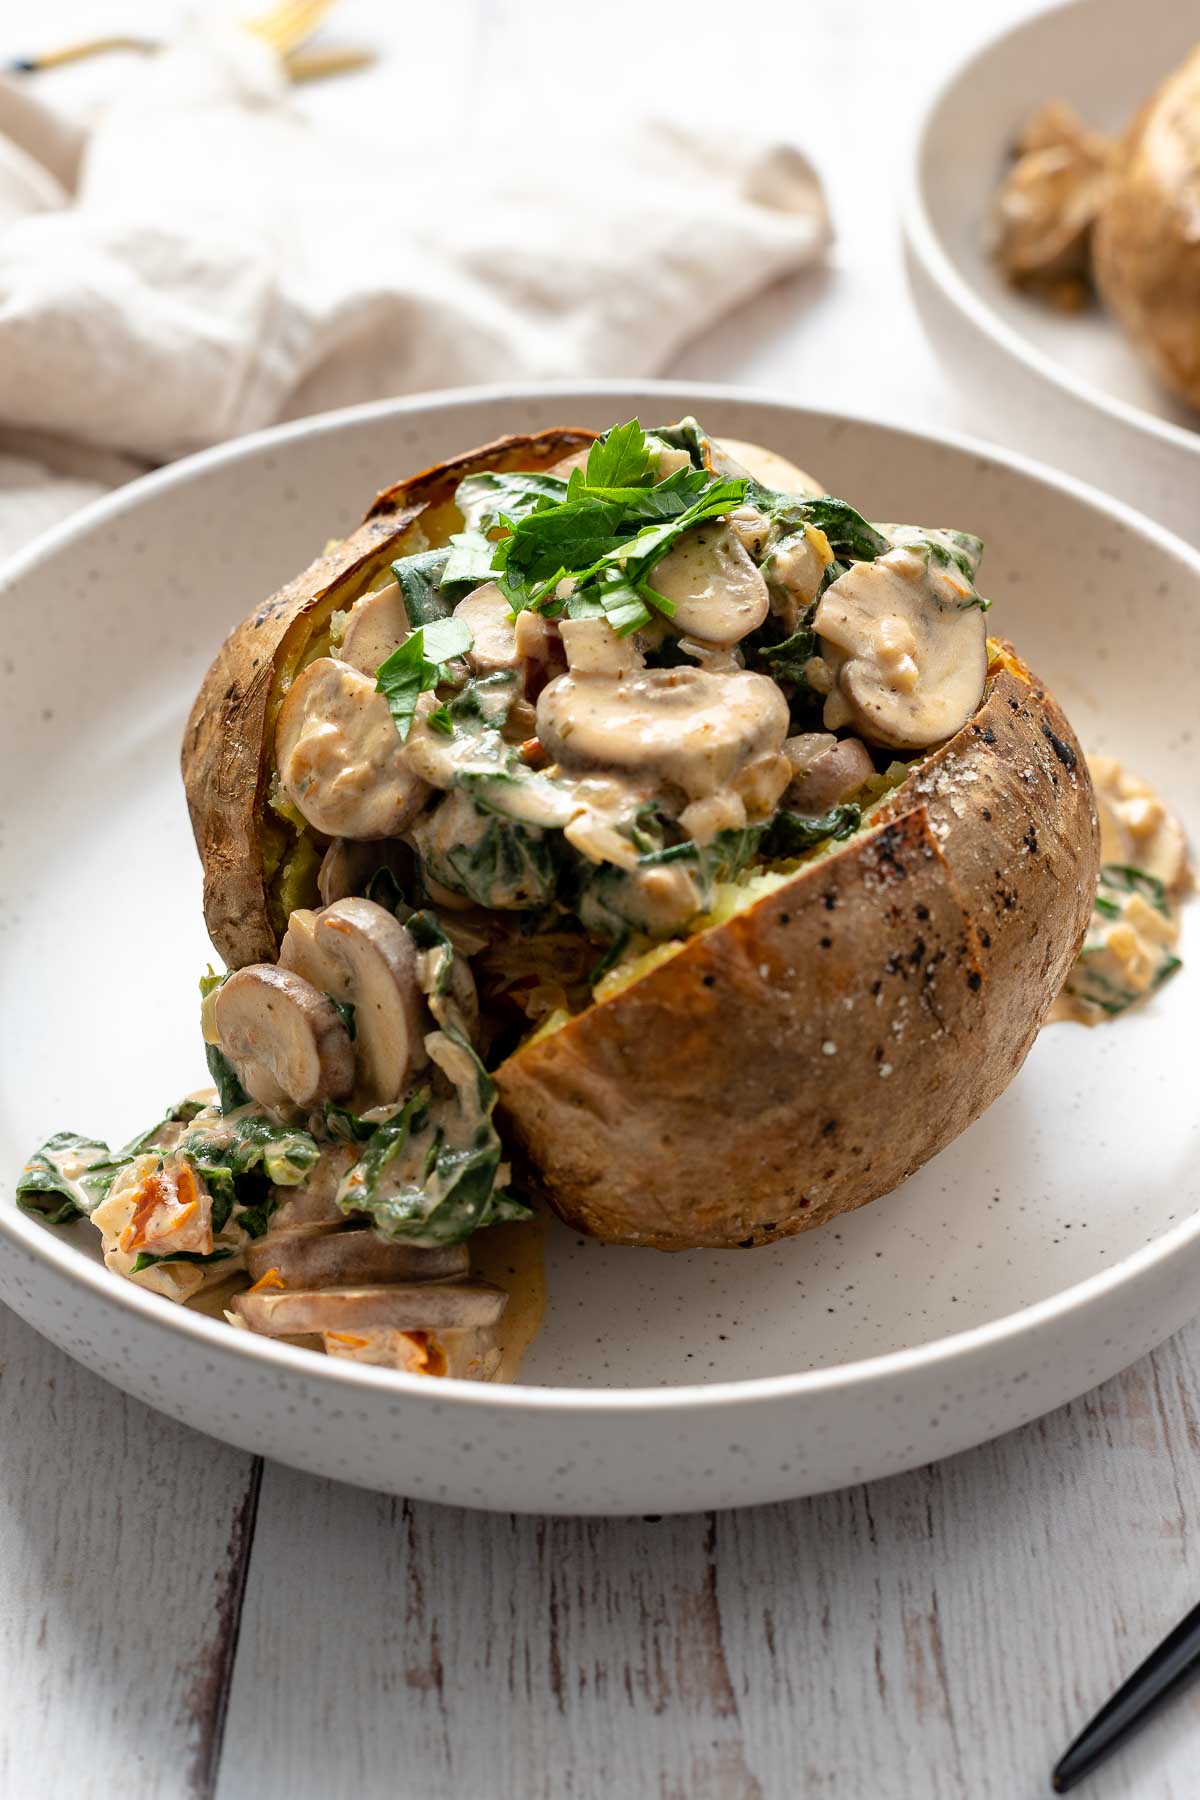 Baked Potatoes with Mushroom-Spinach Filling | Elle Republic